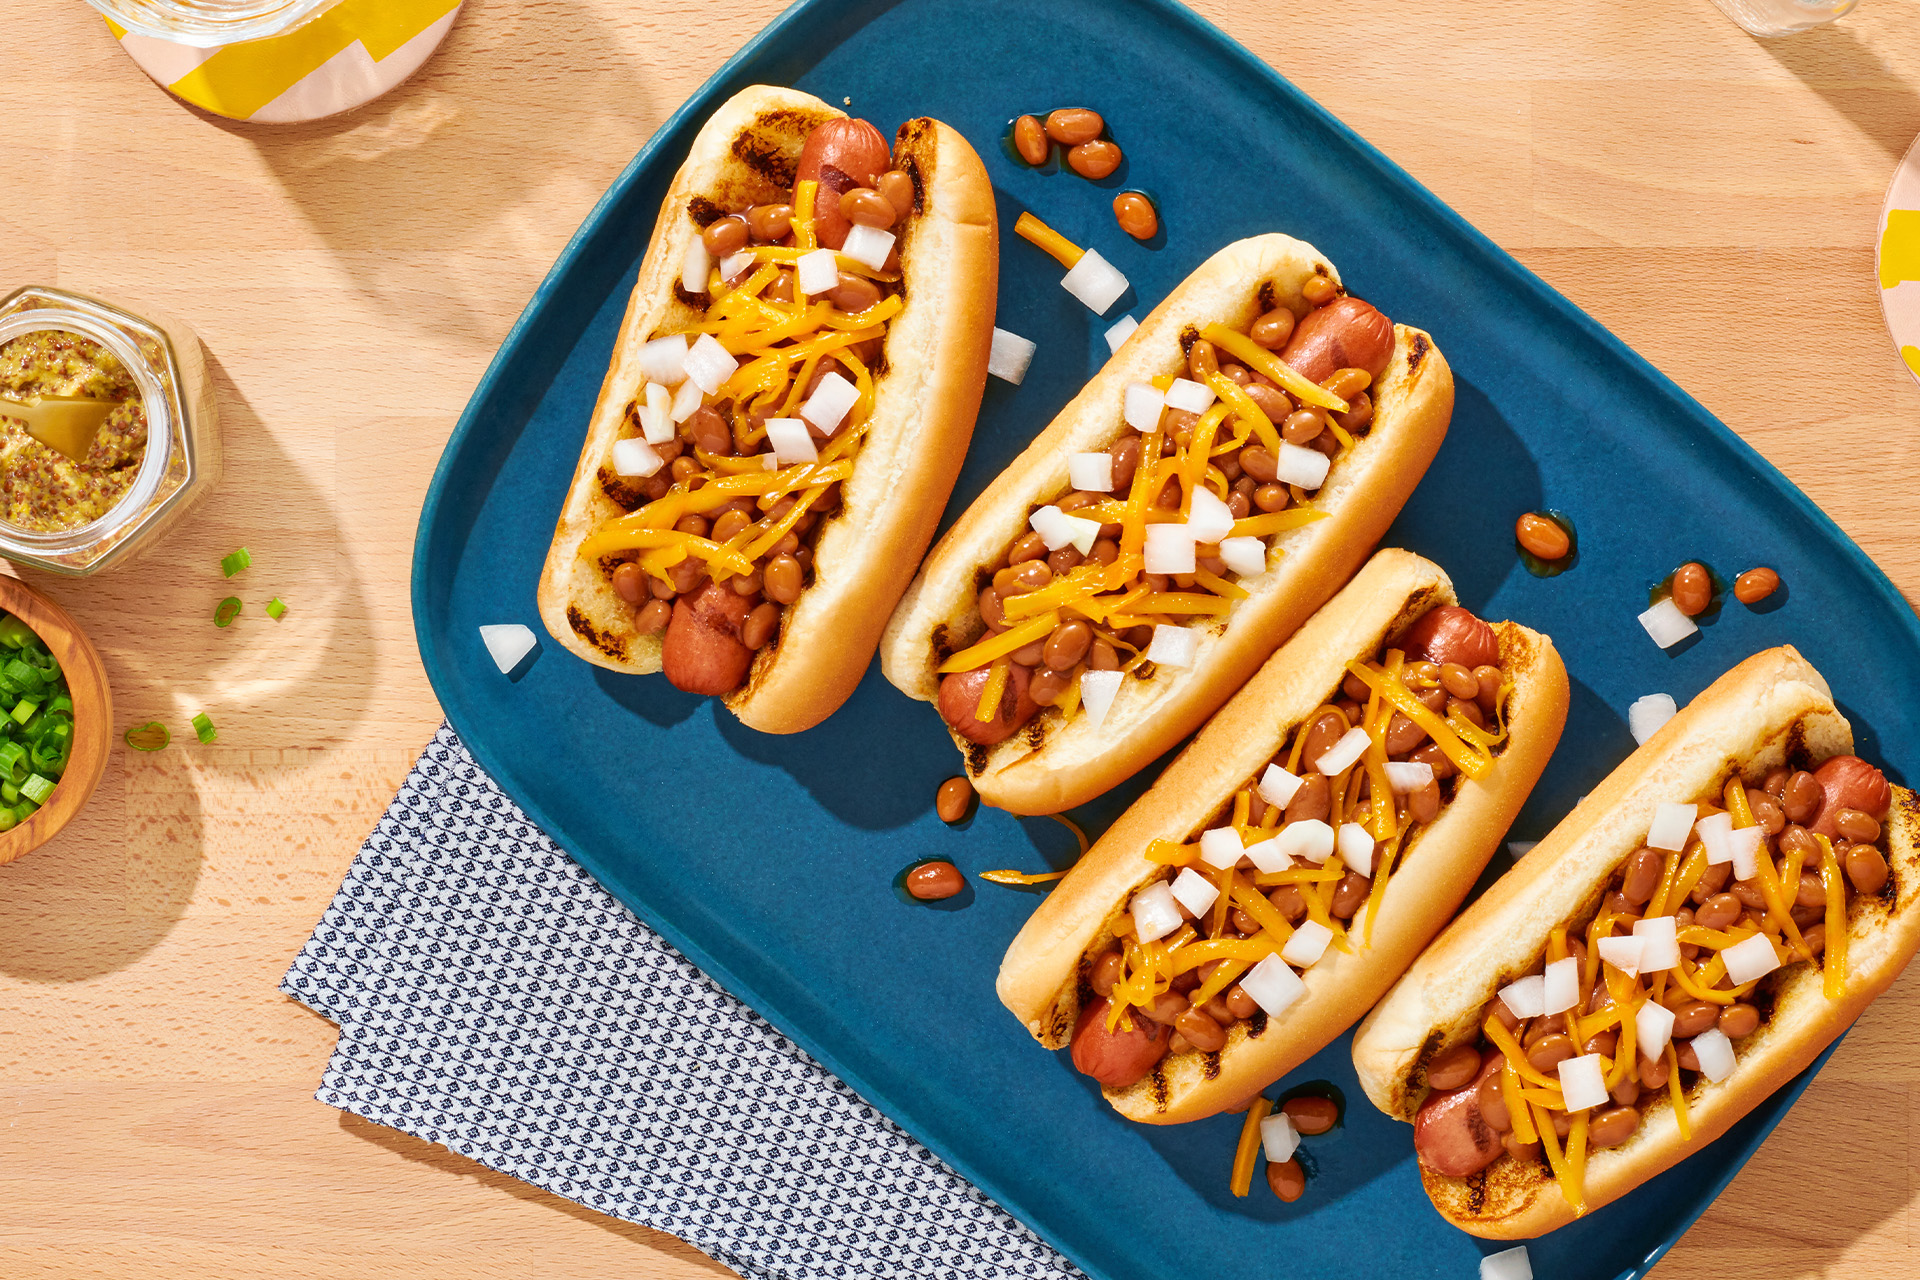 Four hot dogs with cheese, baked beans and onions on blue platter